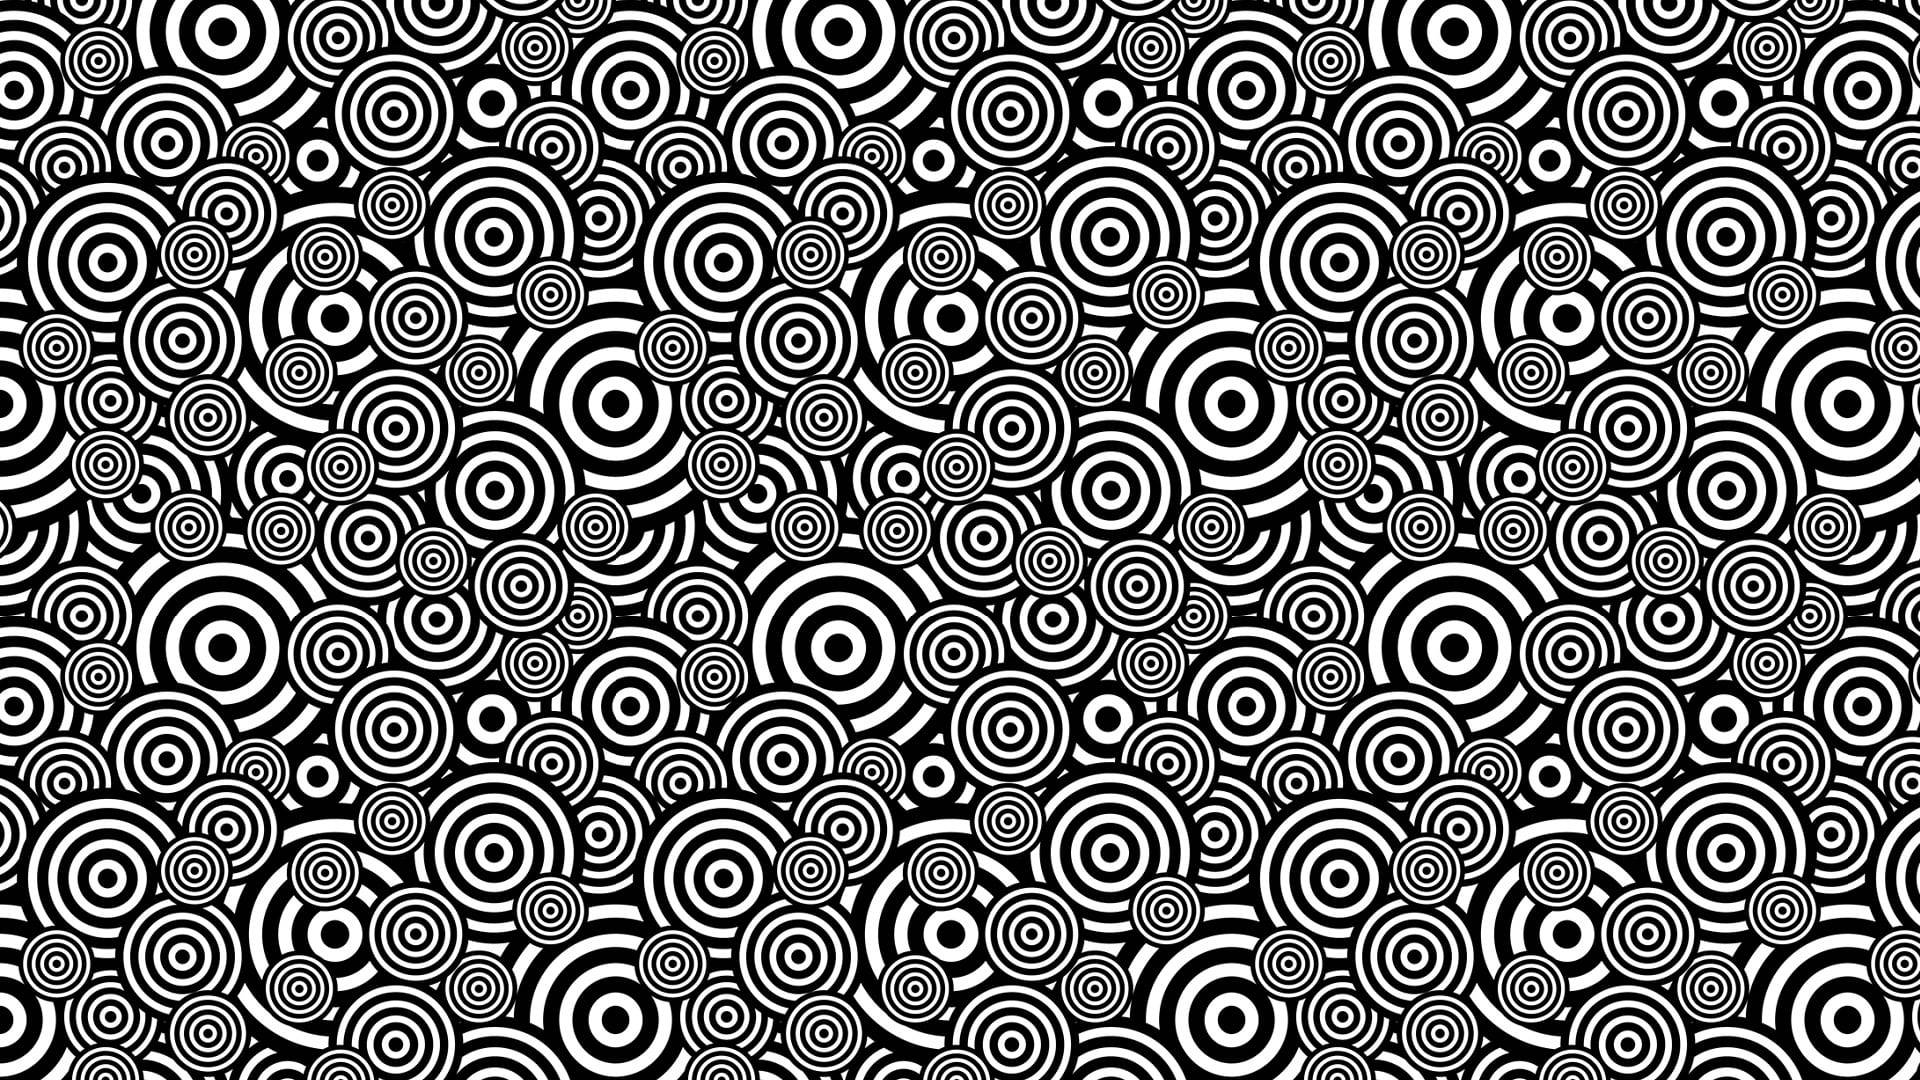 Hypnosis Concentric Circles Different Sizes